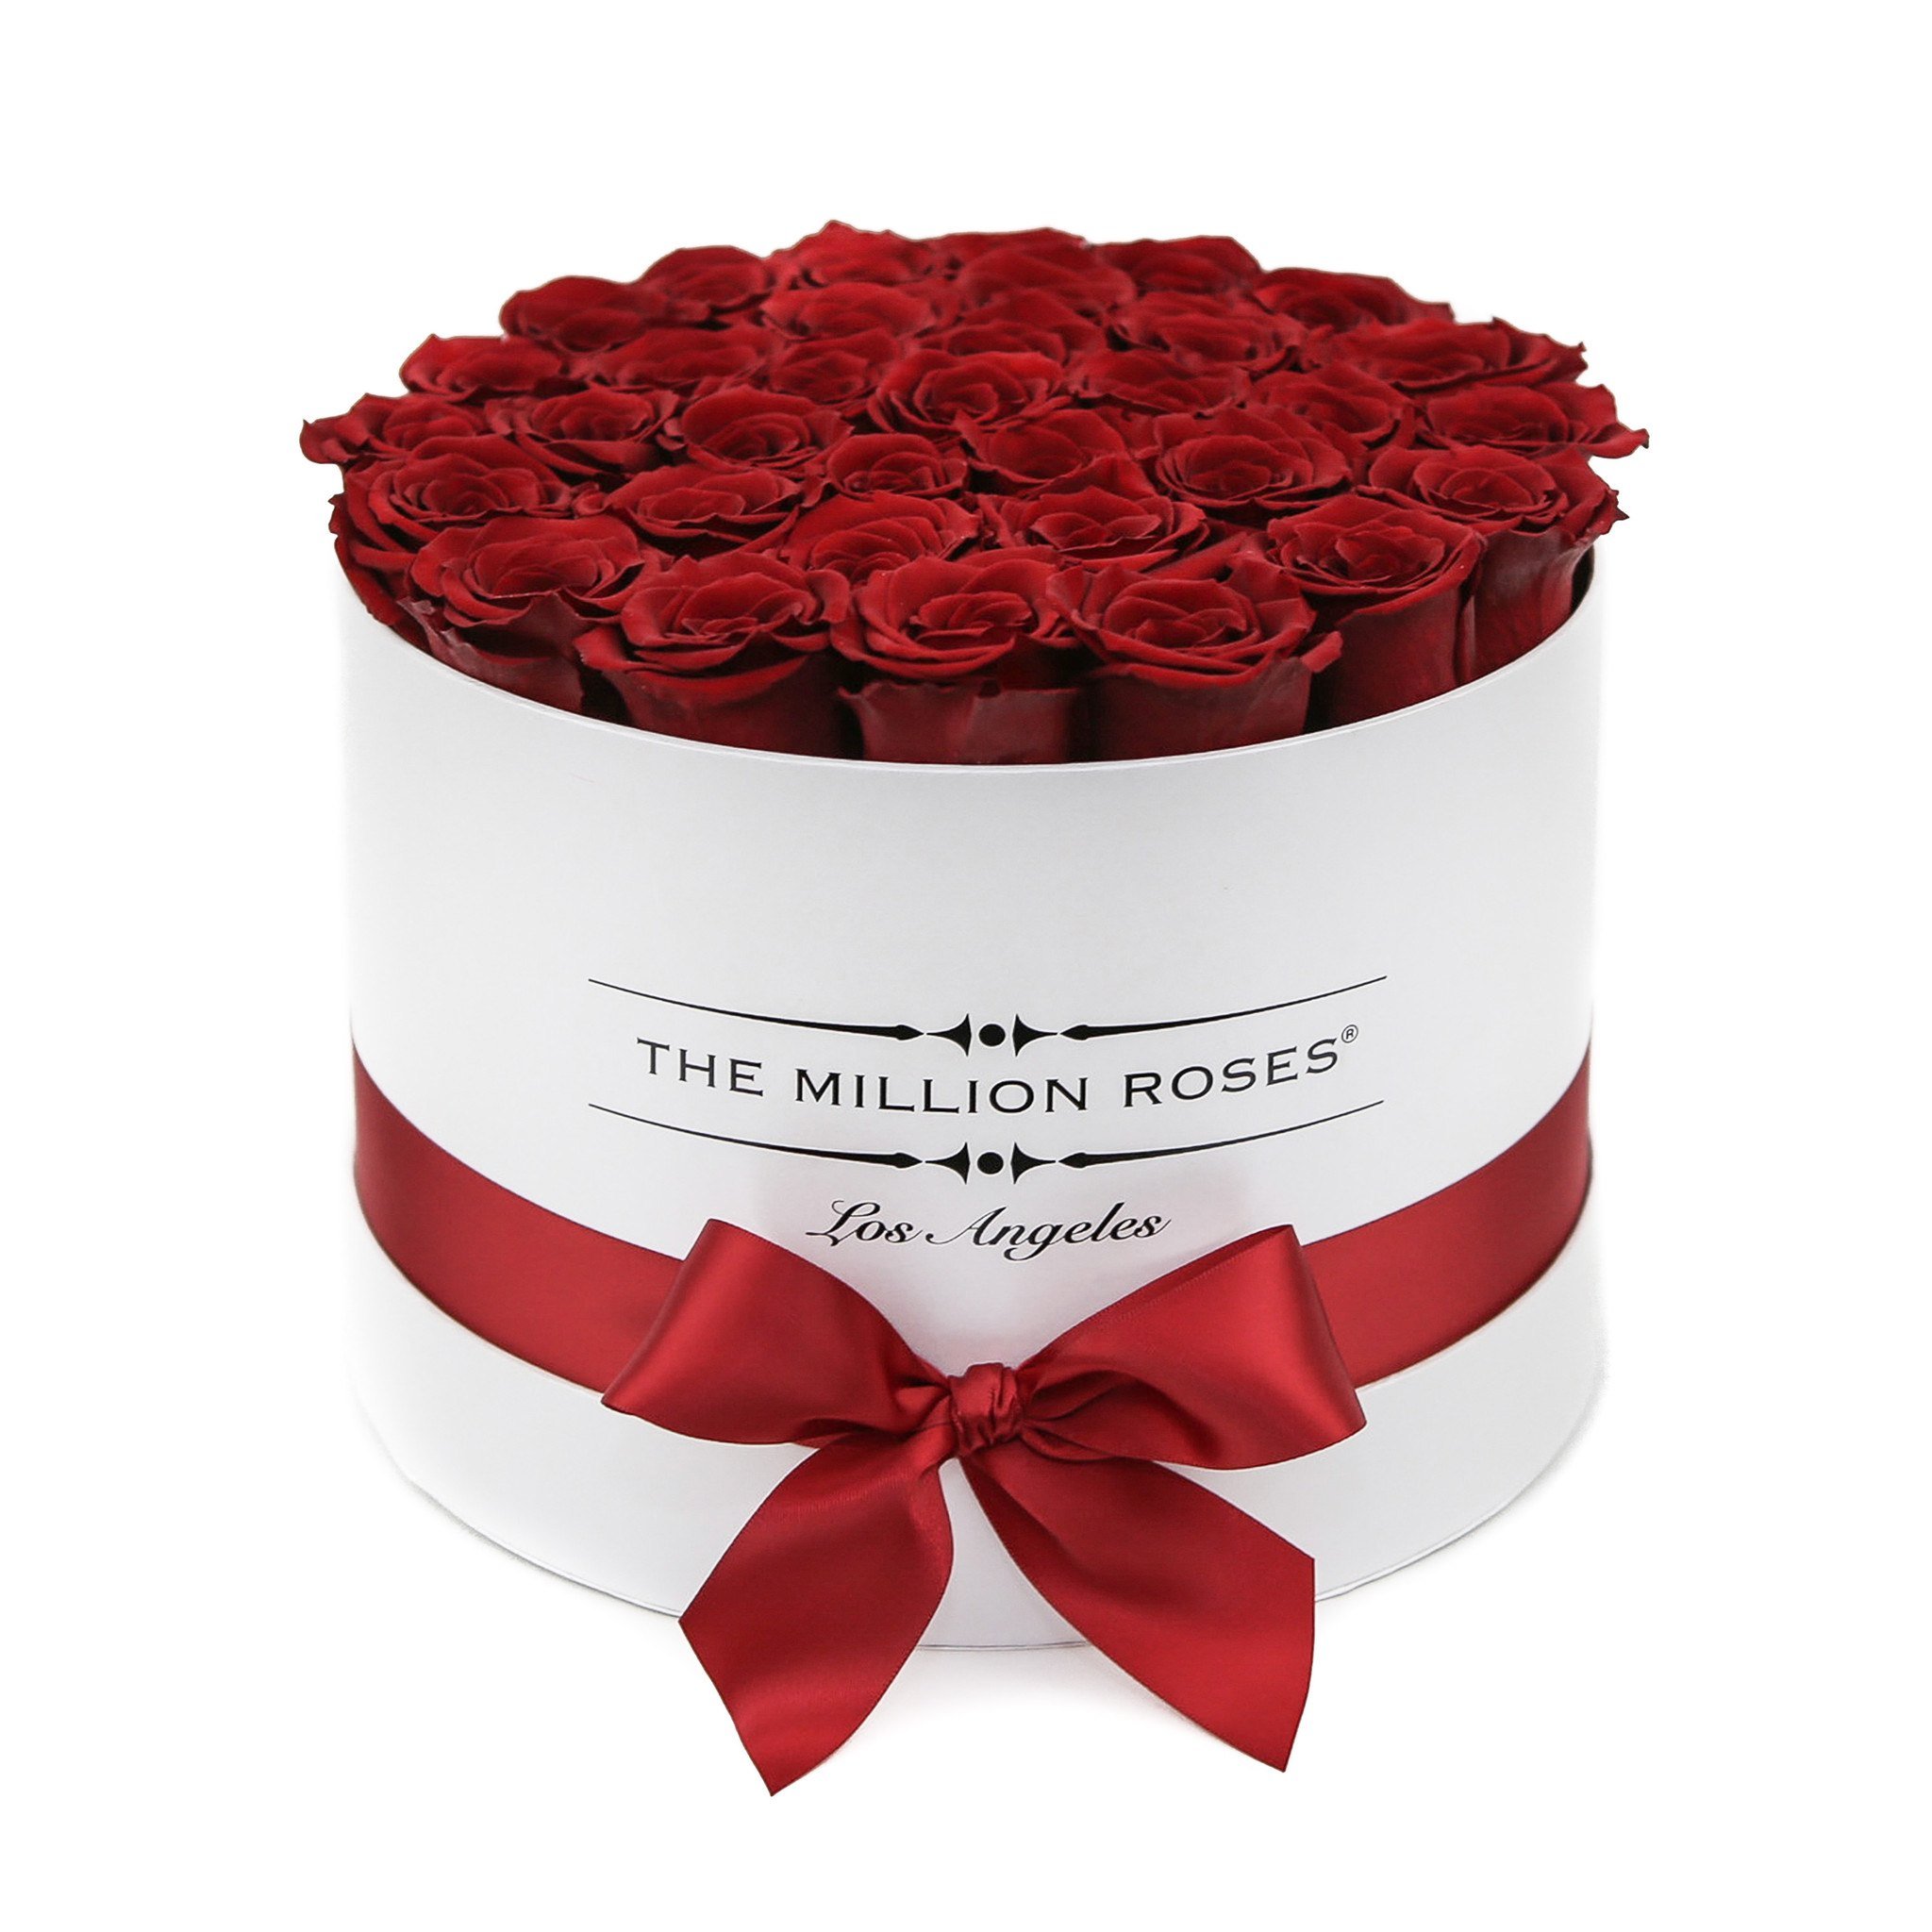 Wholesale Boxes For Roses Packaging